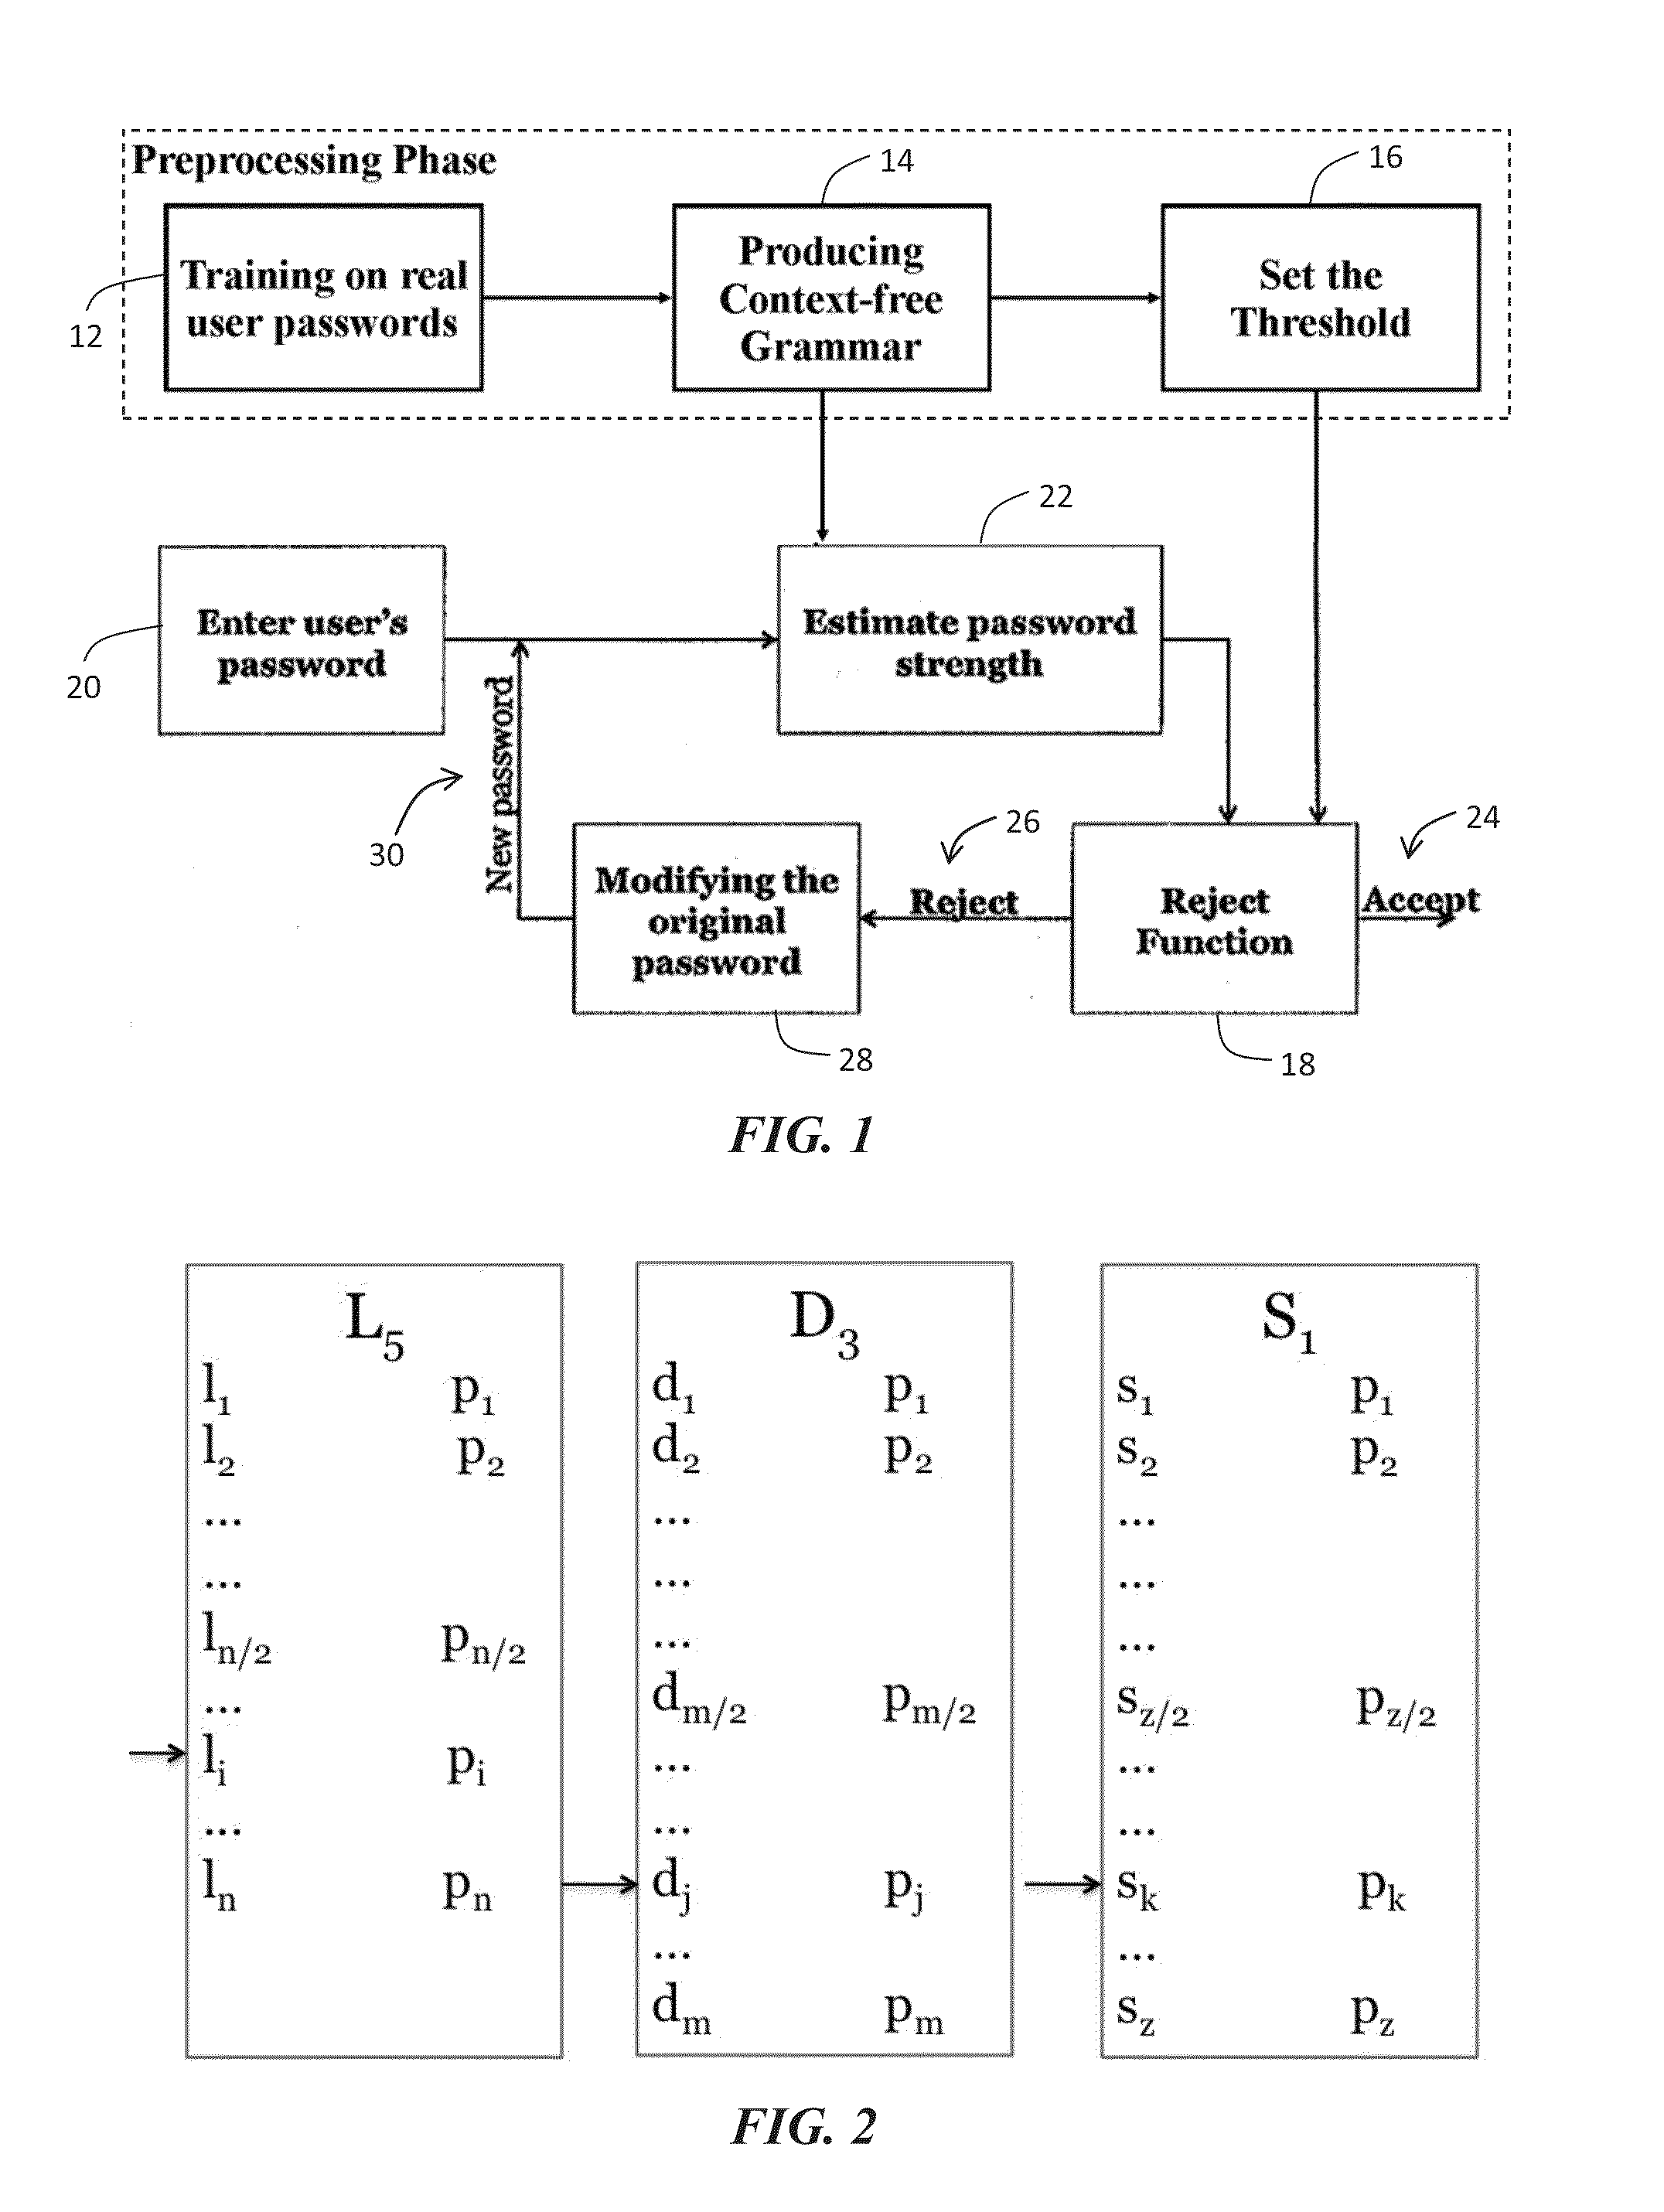 System and methods for analyzing and modifying passwords